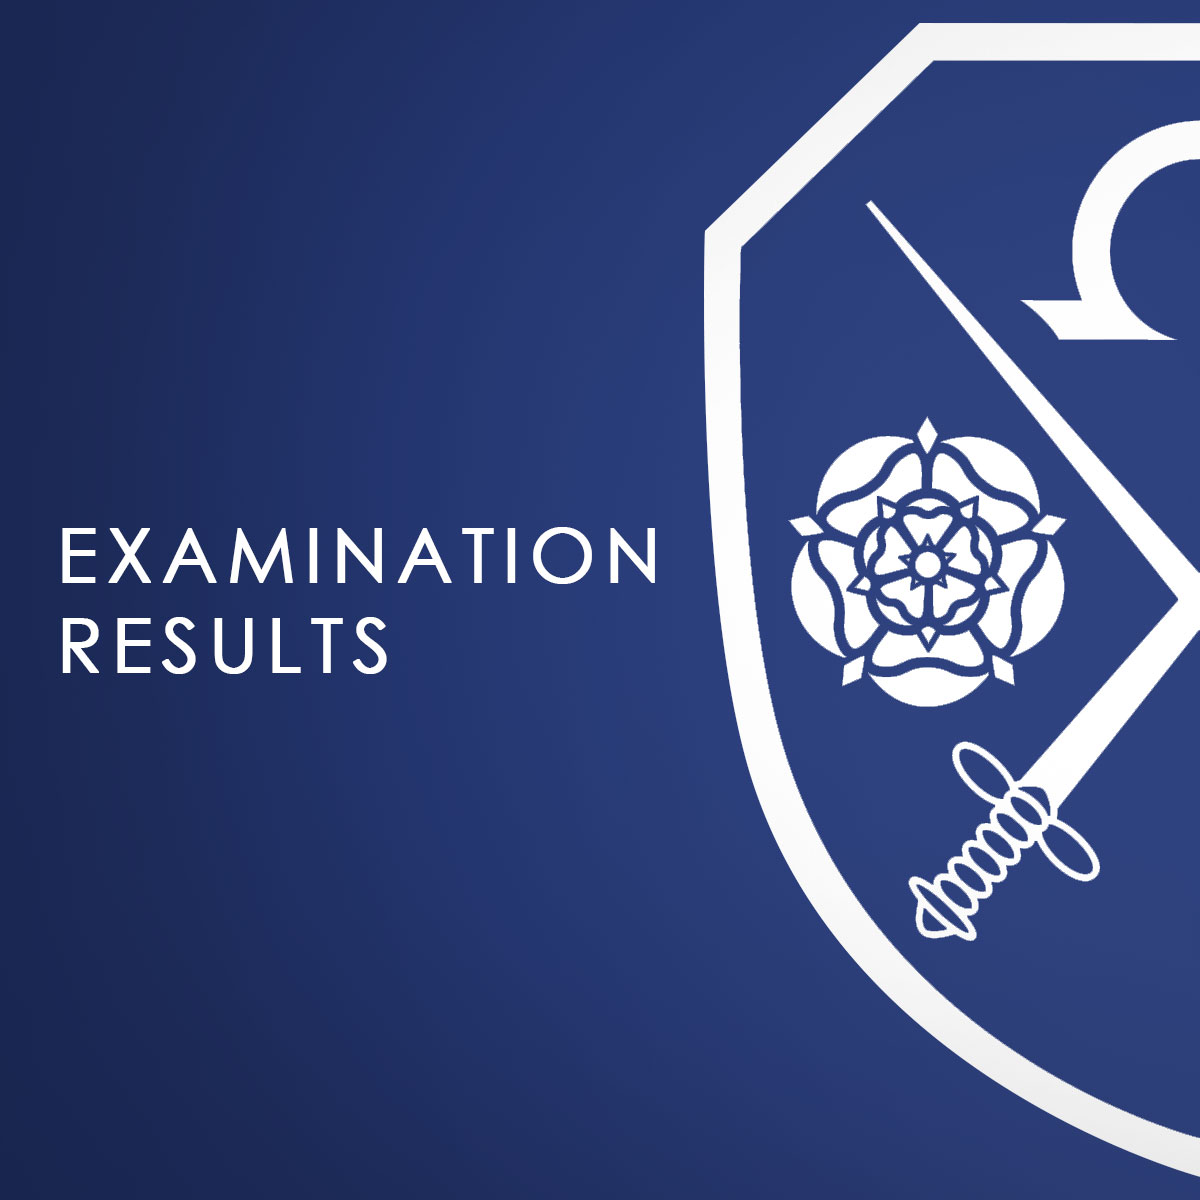 A blue background with the East Barnet School logo which says Examination Results